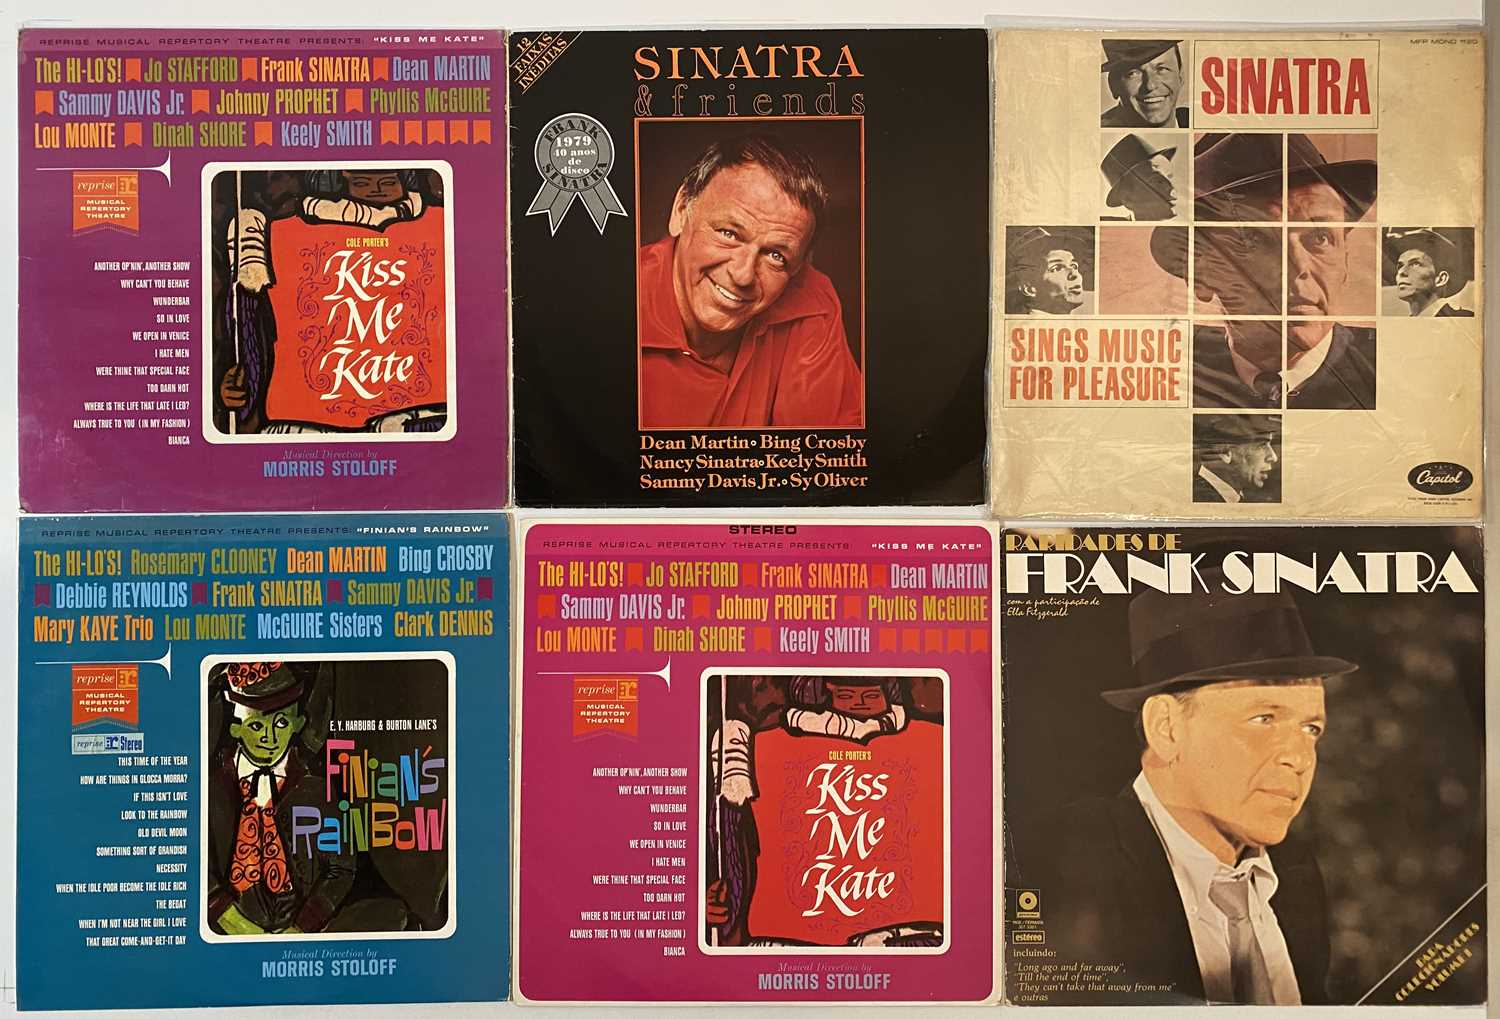 FRANK SINATRA - LPs/ 7" COLLECTION - Image 5 of 6